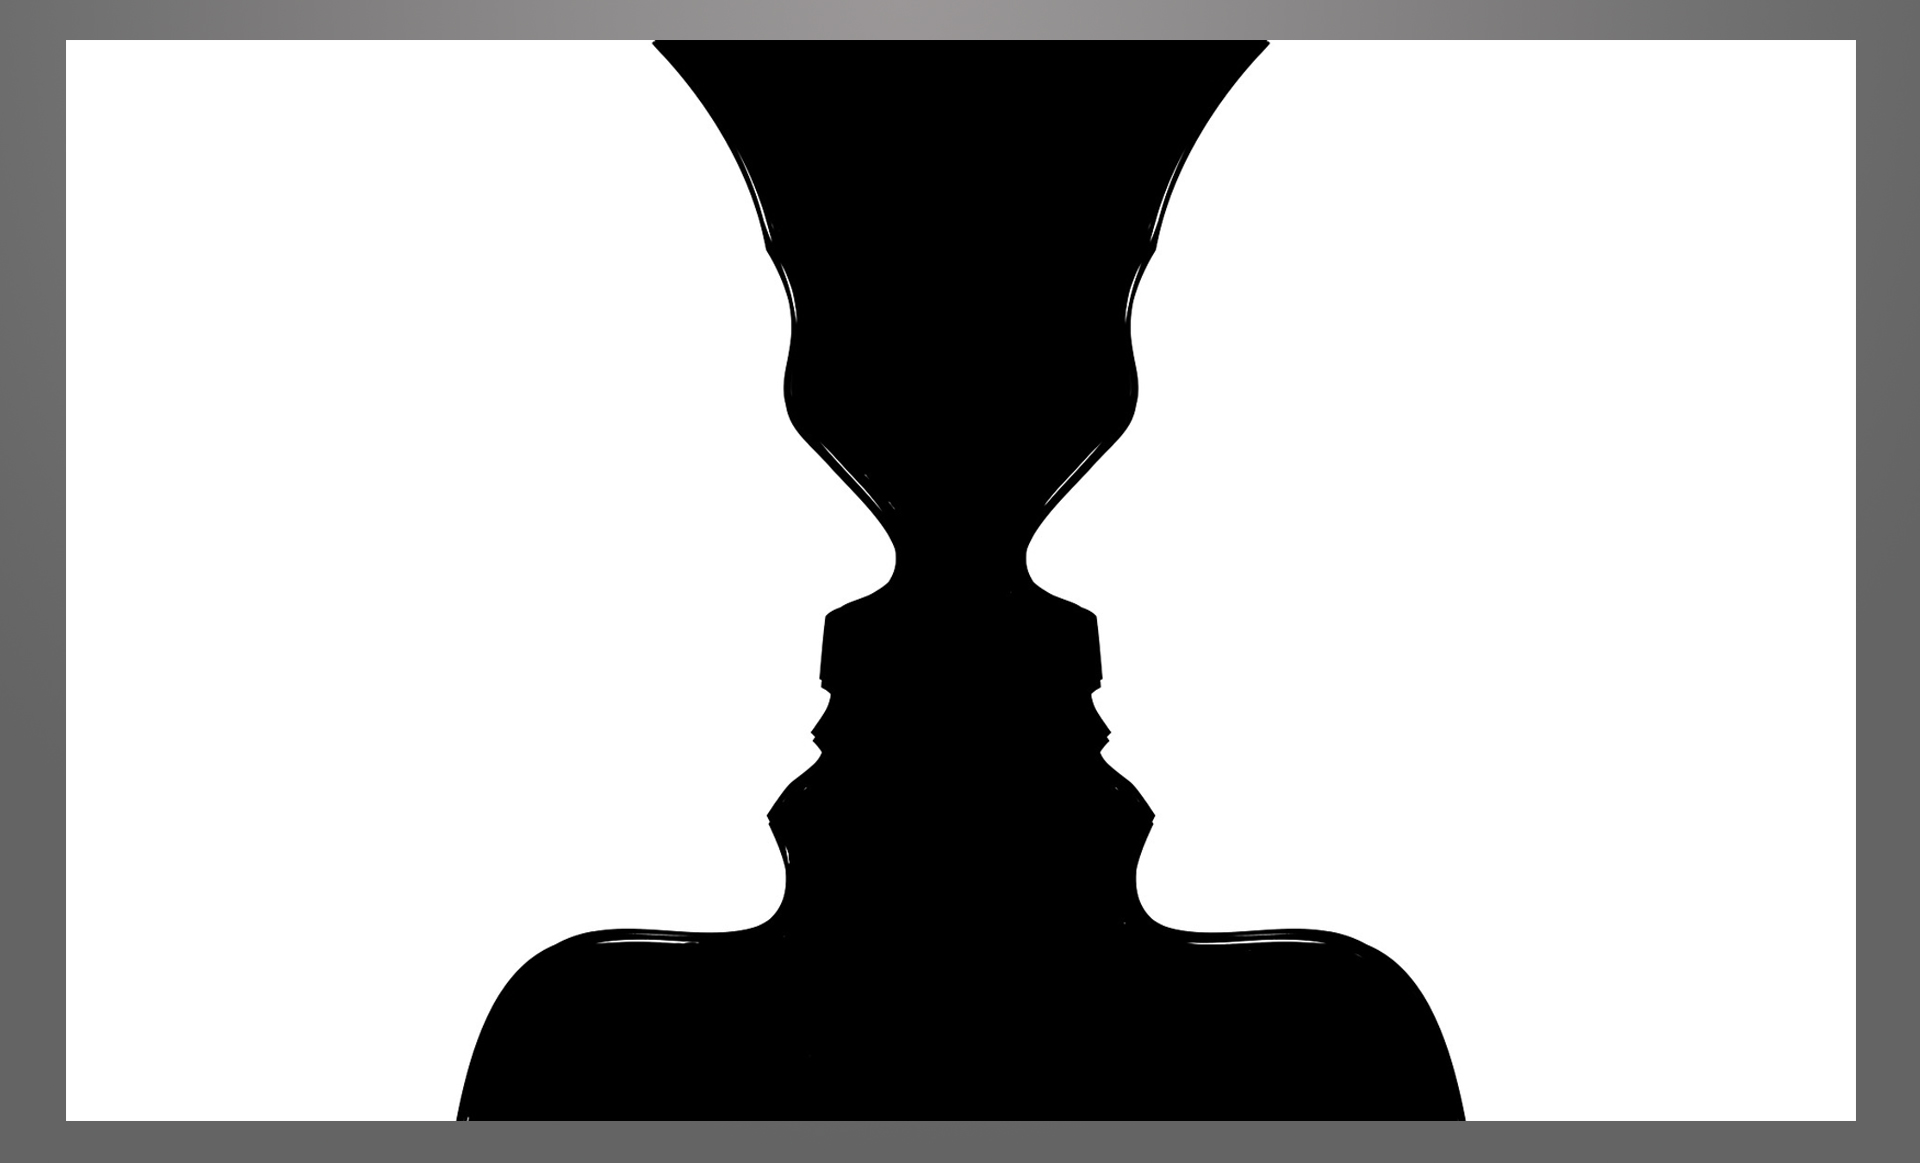 optical illusion - two heads or a vase